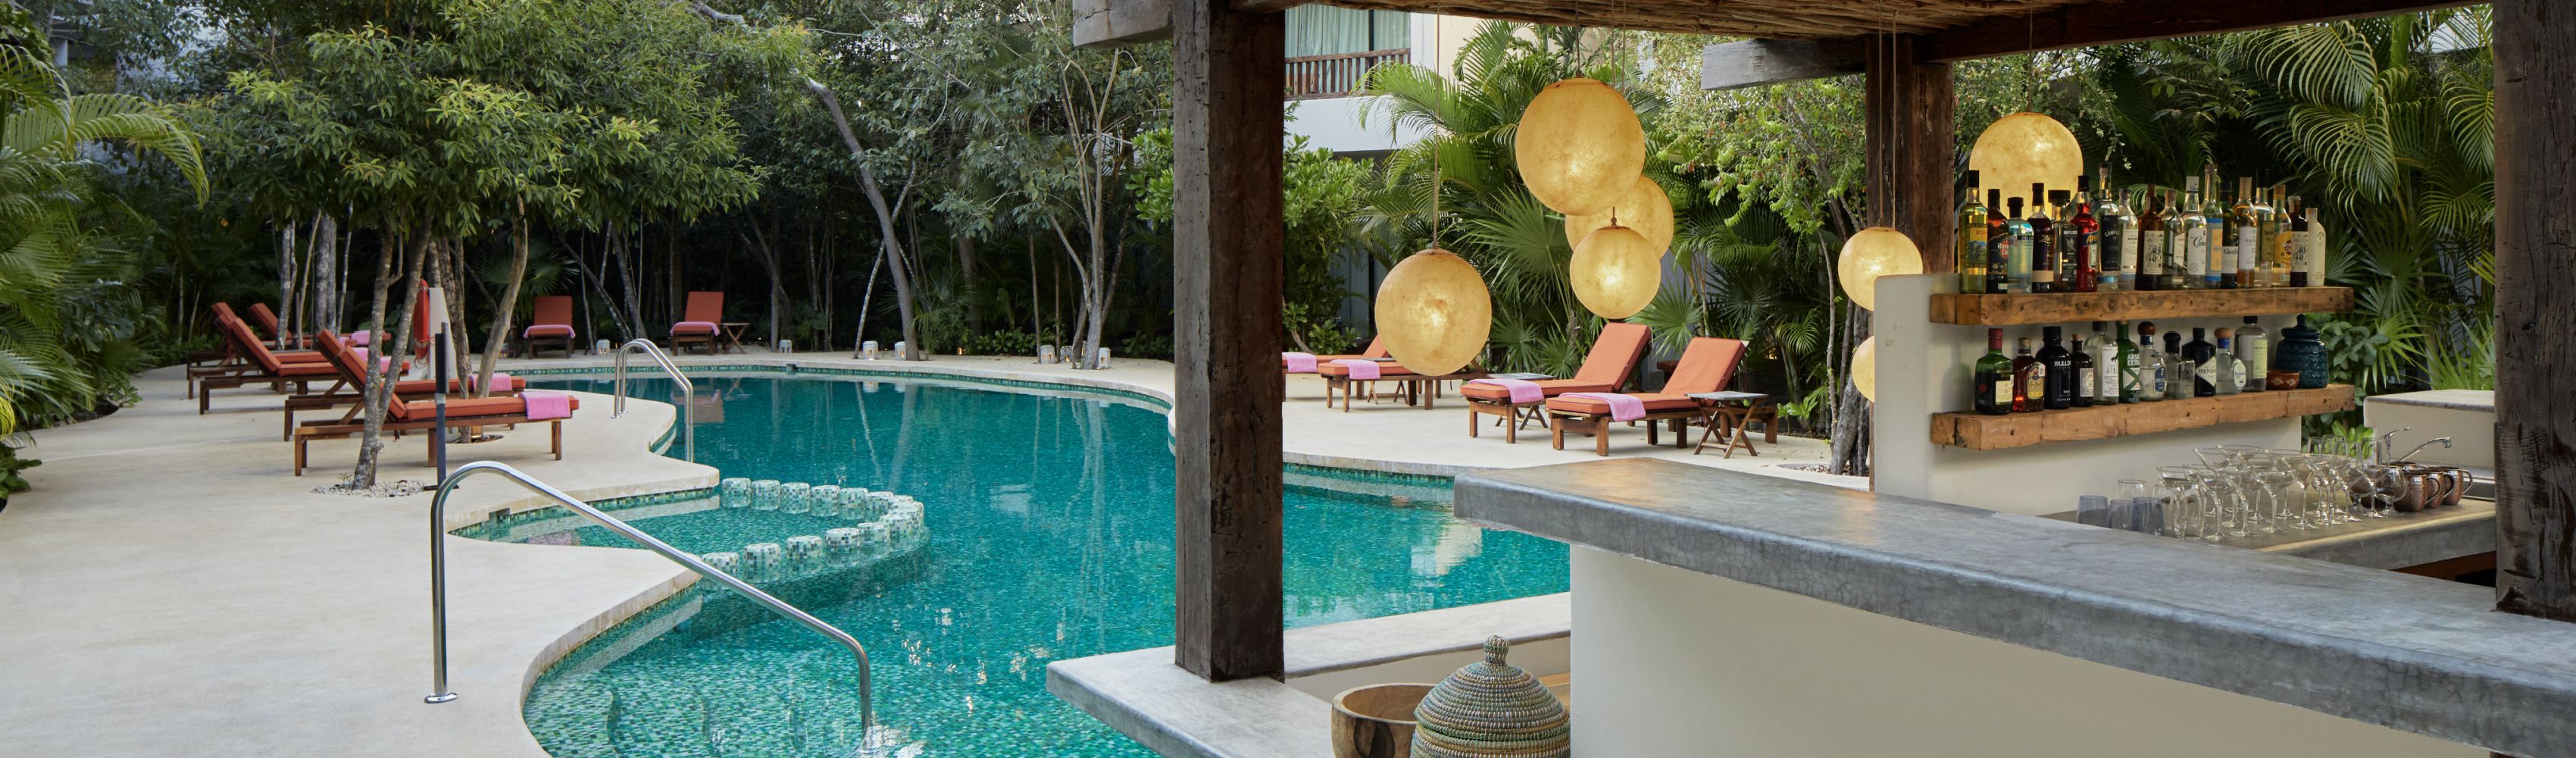 Sparkling outdoor pool and bar at Kimpton's Tulum hotel